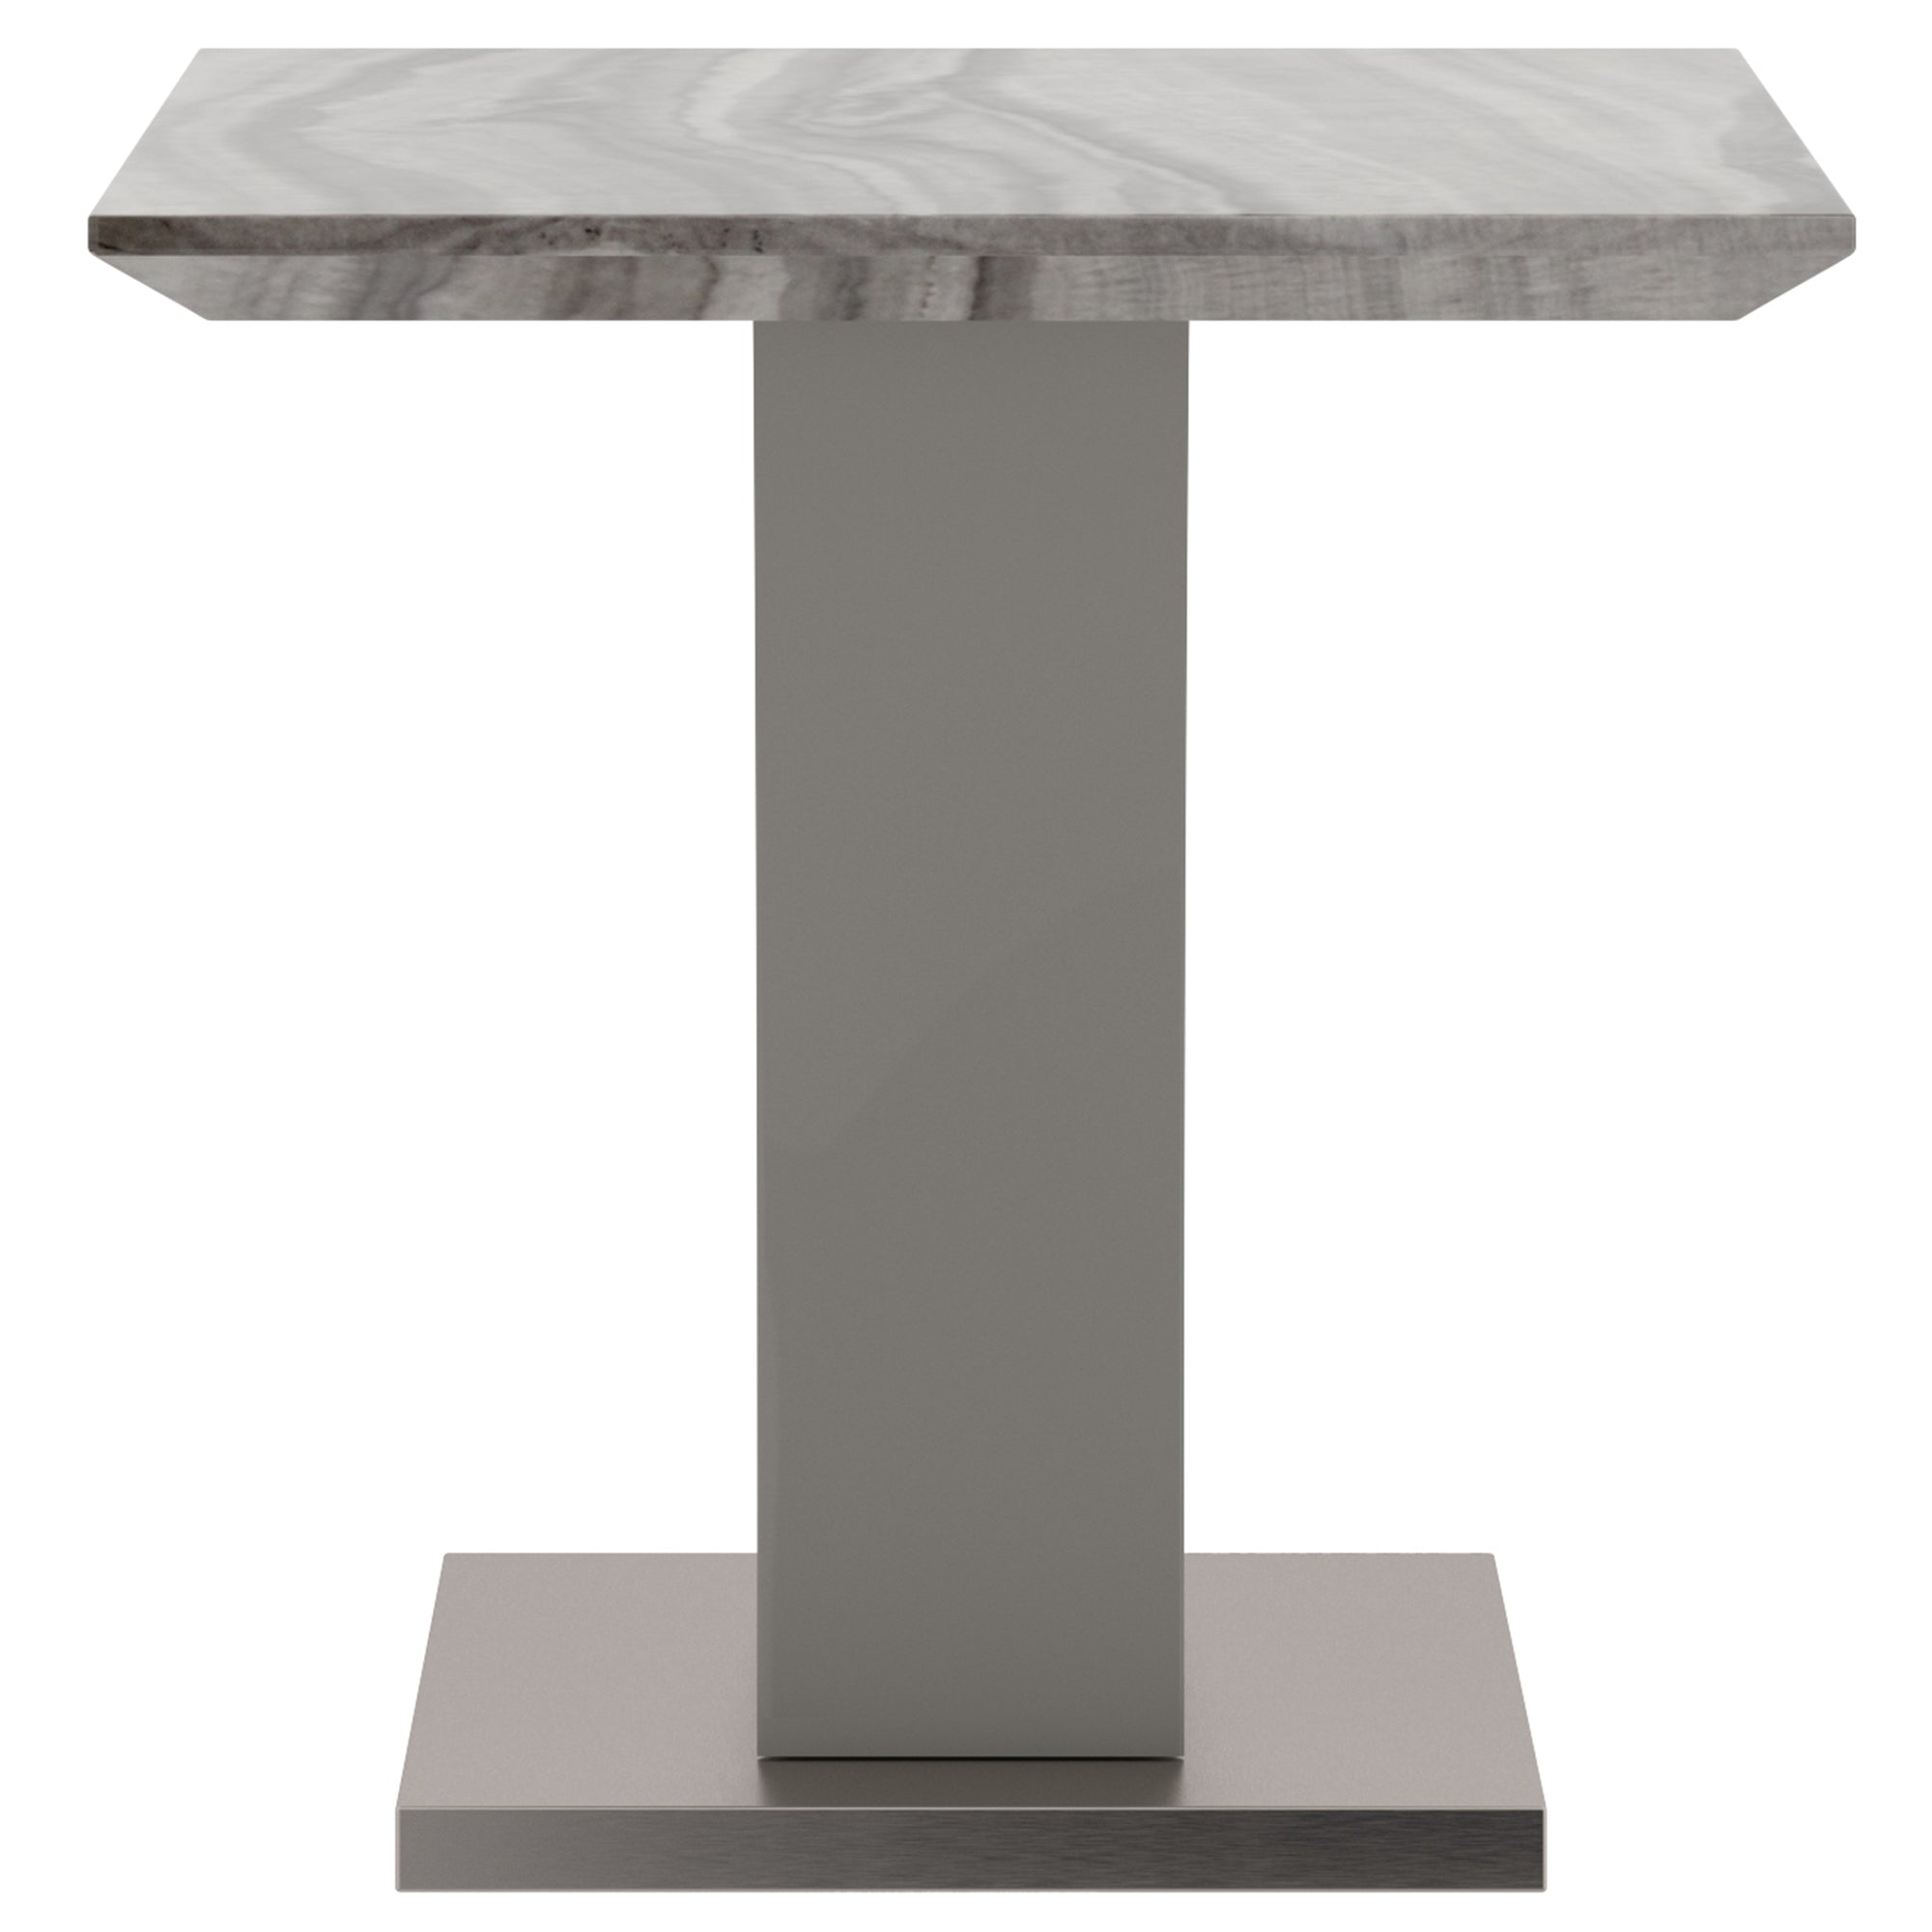 Napoli Accent Table in Light Grey 501-545GY